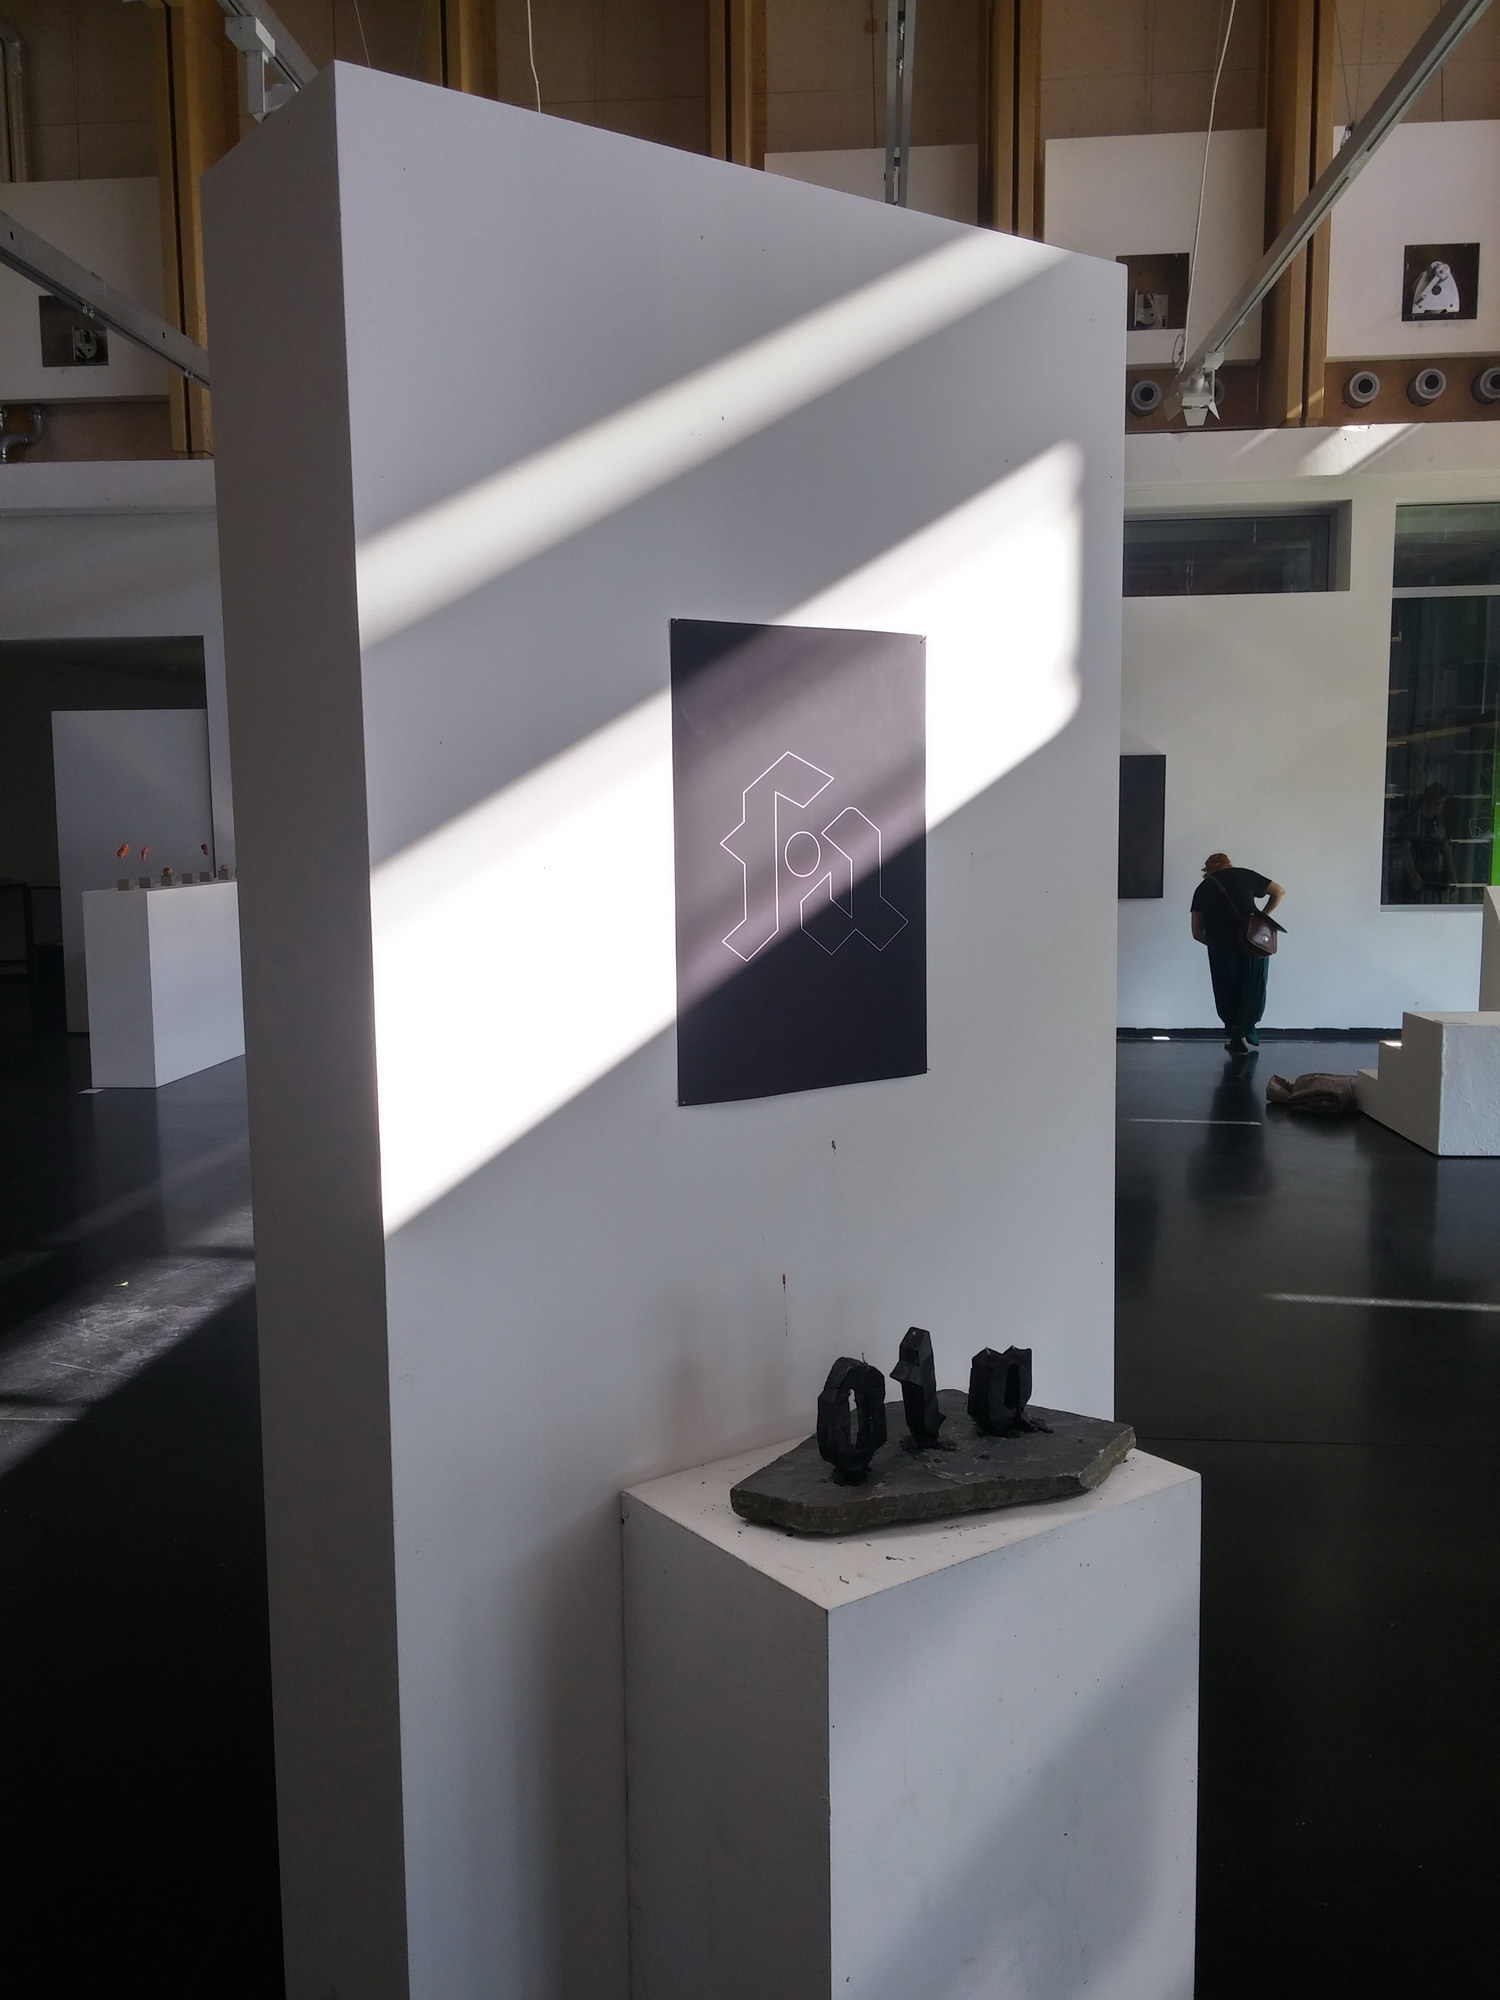 Exhibition of the typeface we created, Oetinger